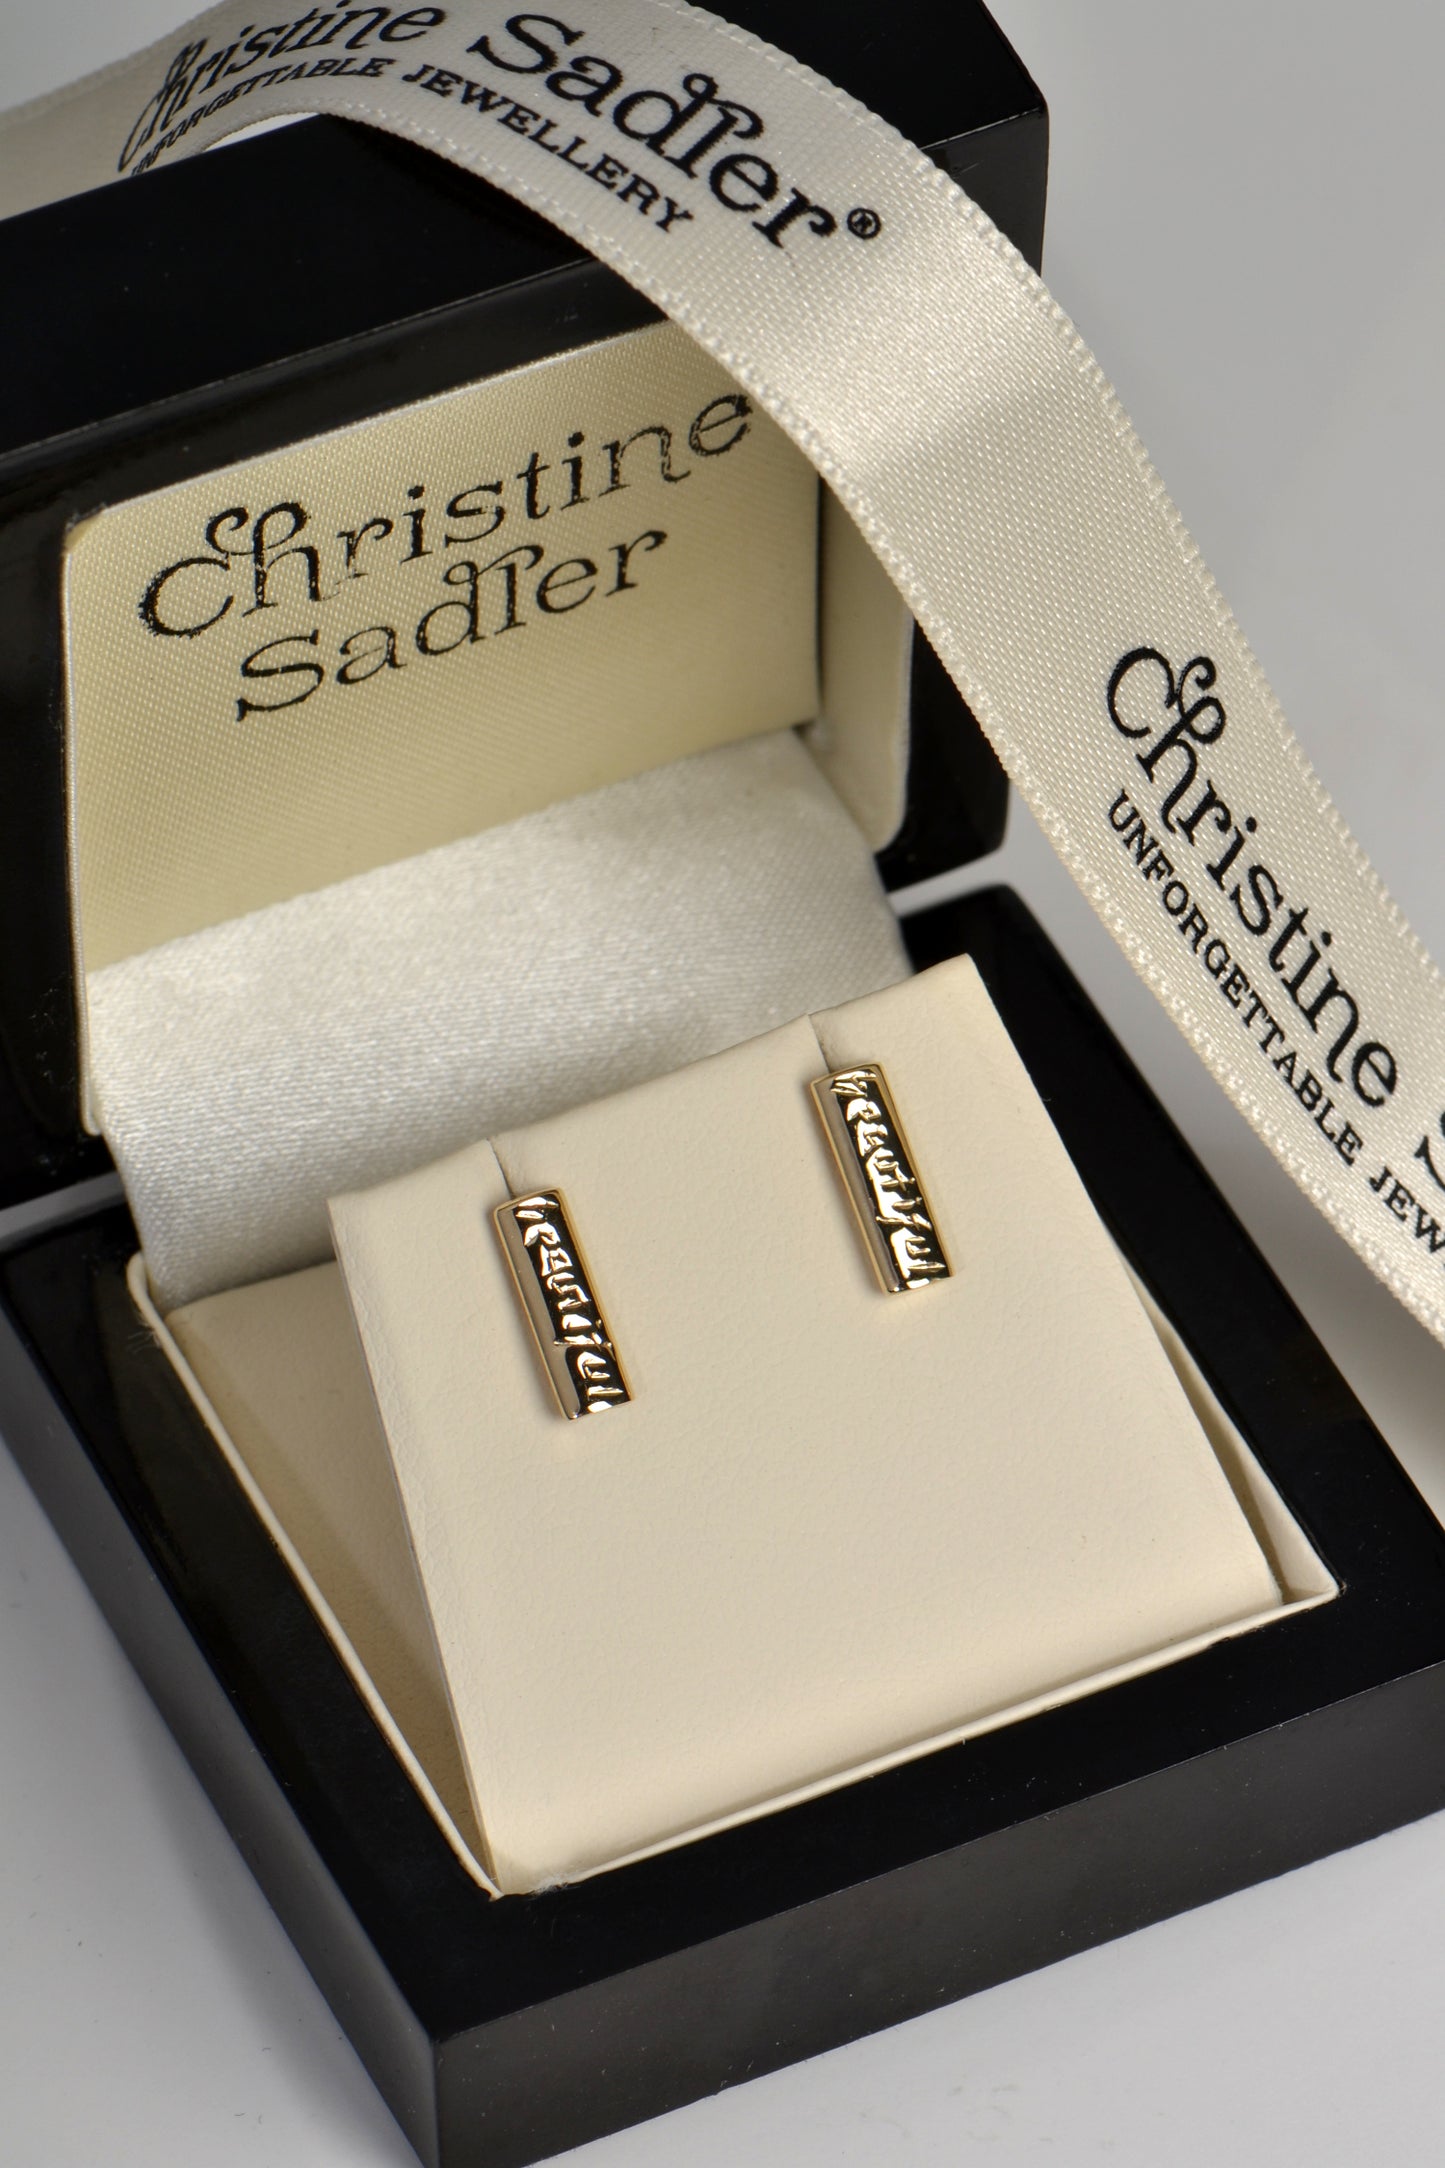 handmade yellow gold earrings engraved beautiful in a wooden box and gift wrapped in branded Christine Sadler packaging